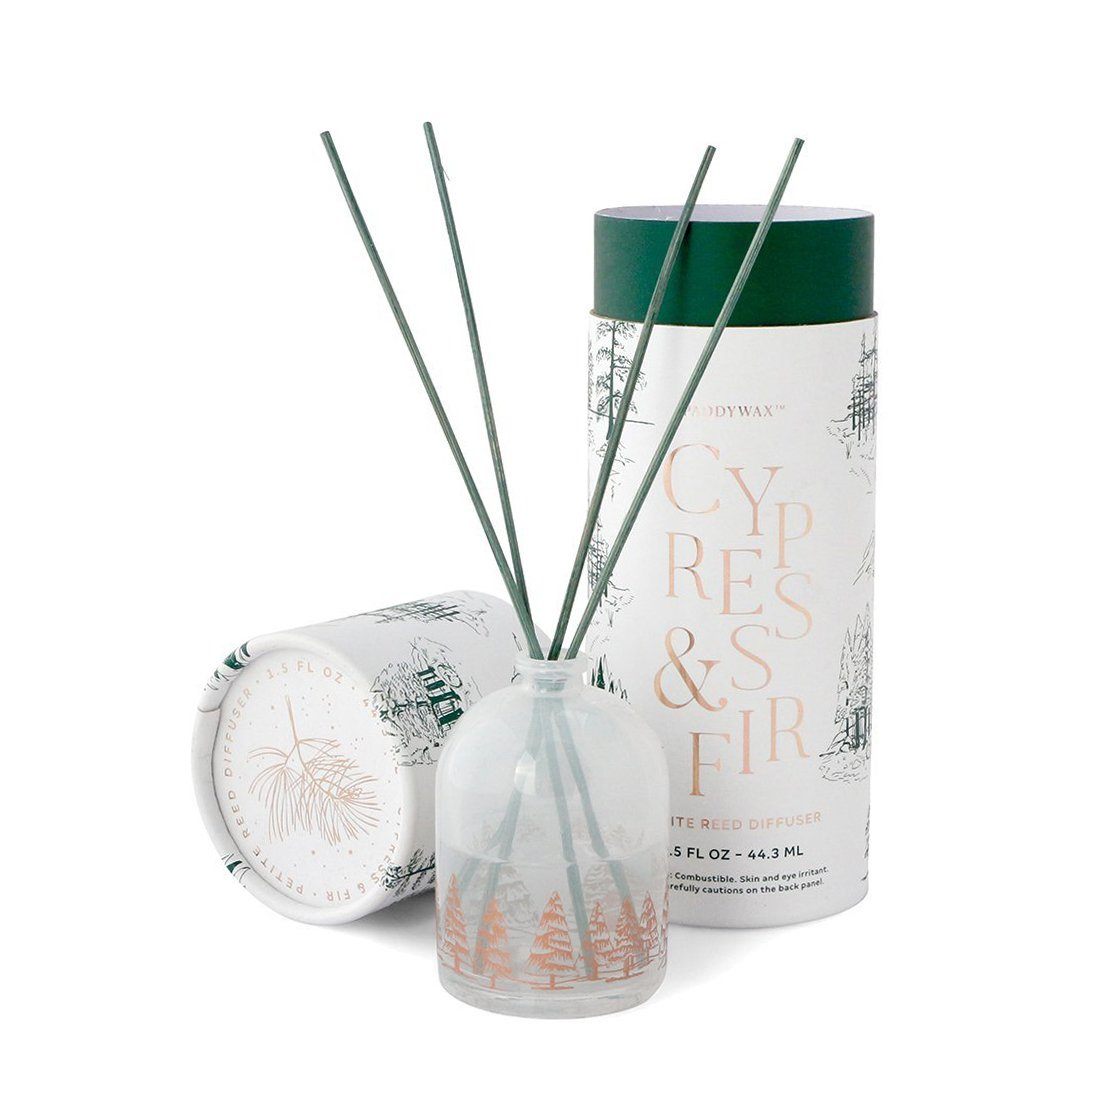 Cypress + Fir Petite Diffuser-Home + Gifts-Vixen Collection, Day Spa and Women's Boutique Located in Seattle, Washington